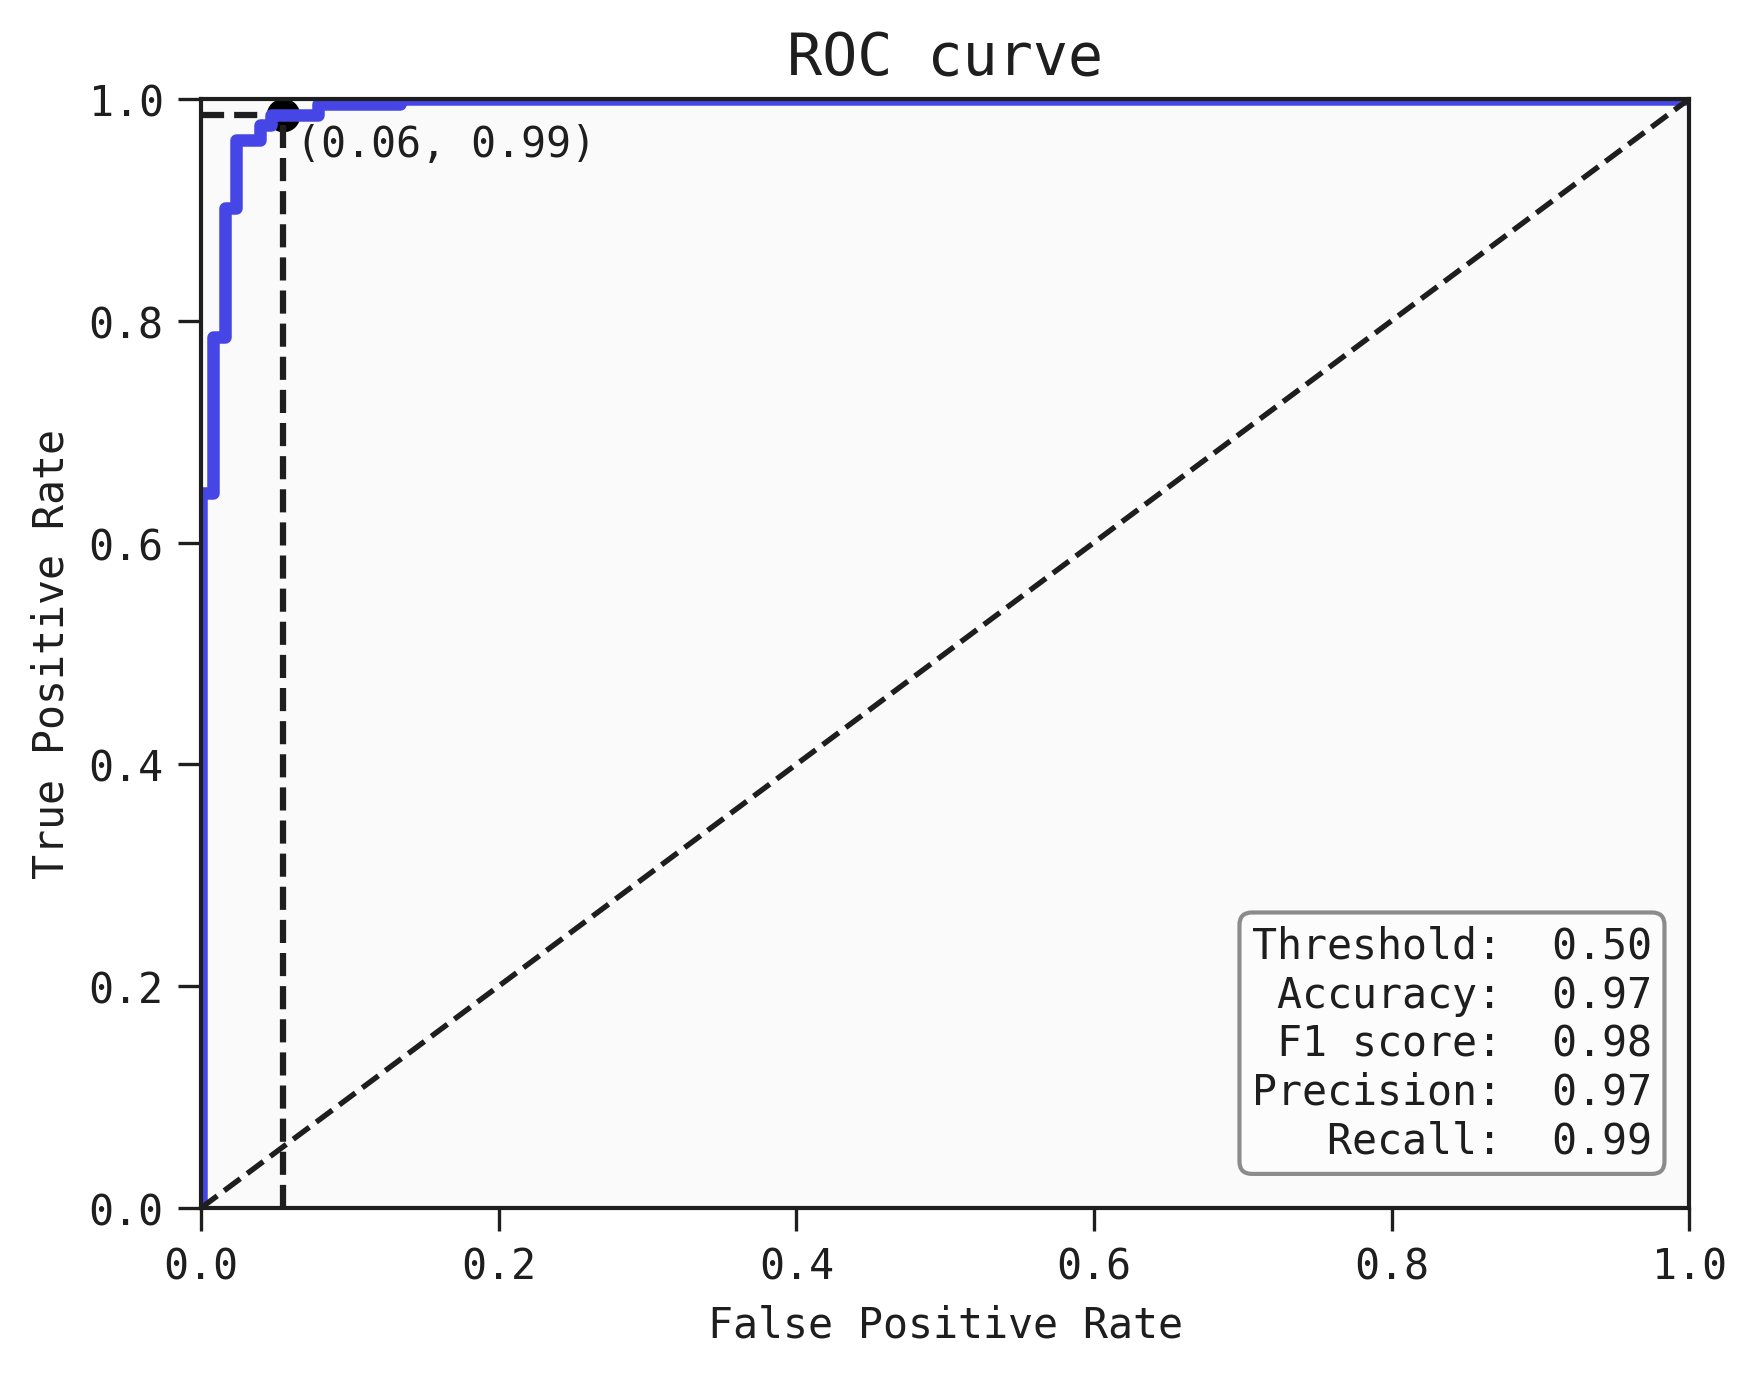 Plot showing the ROC curve with a custom threshold highlighted